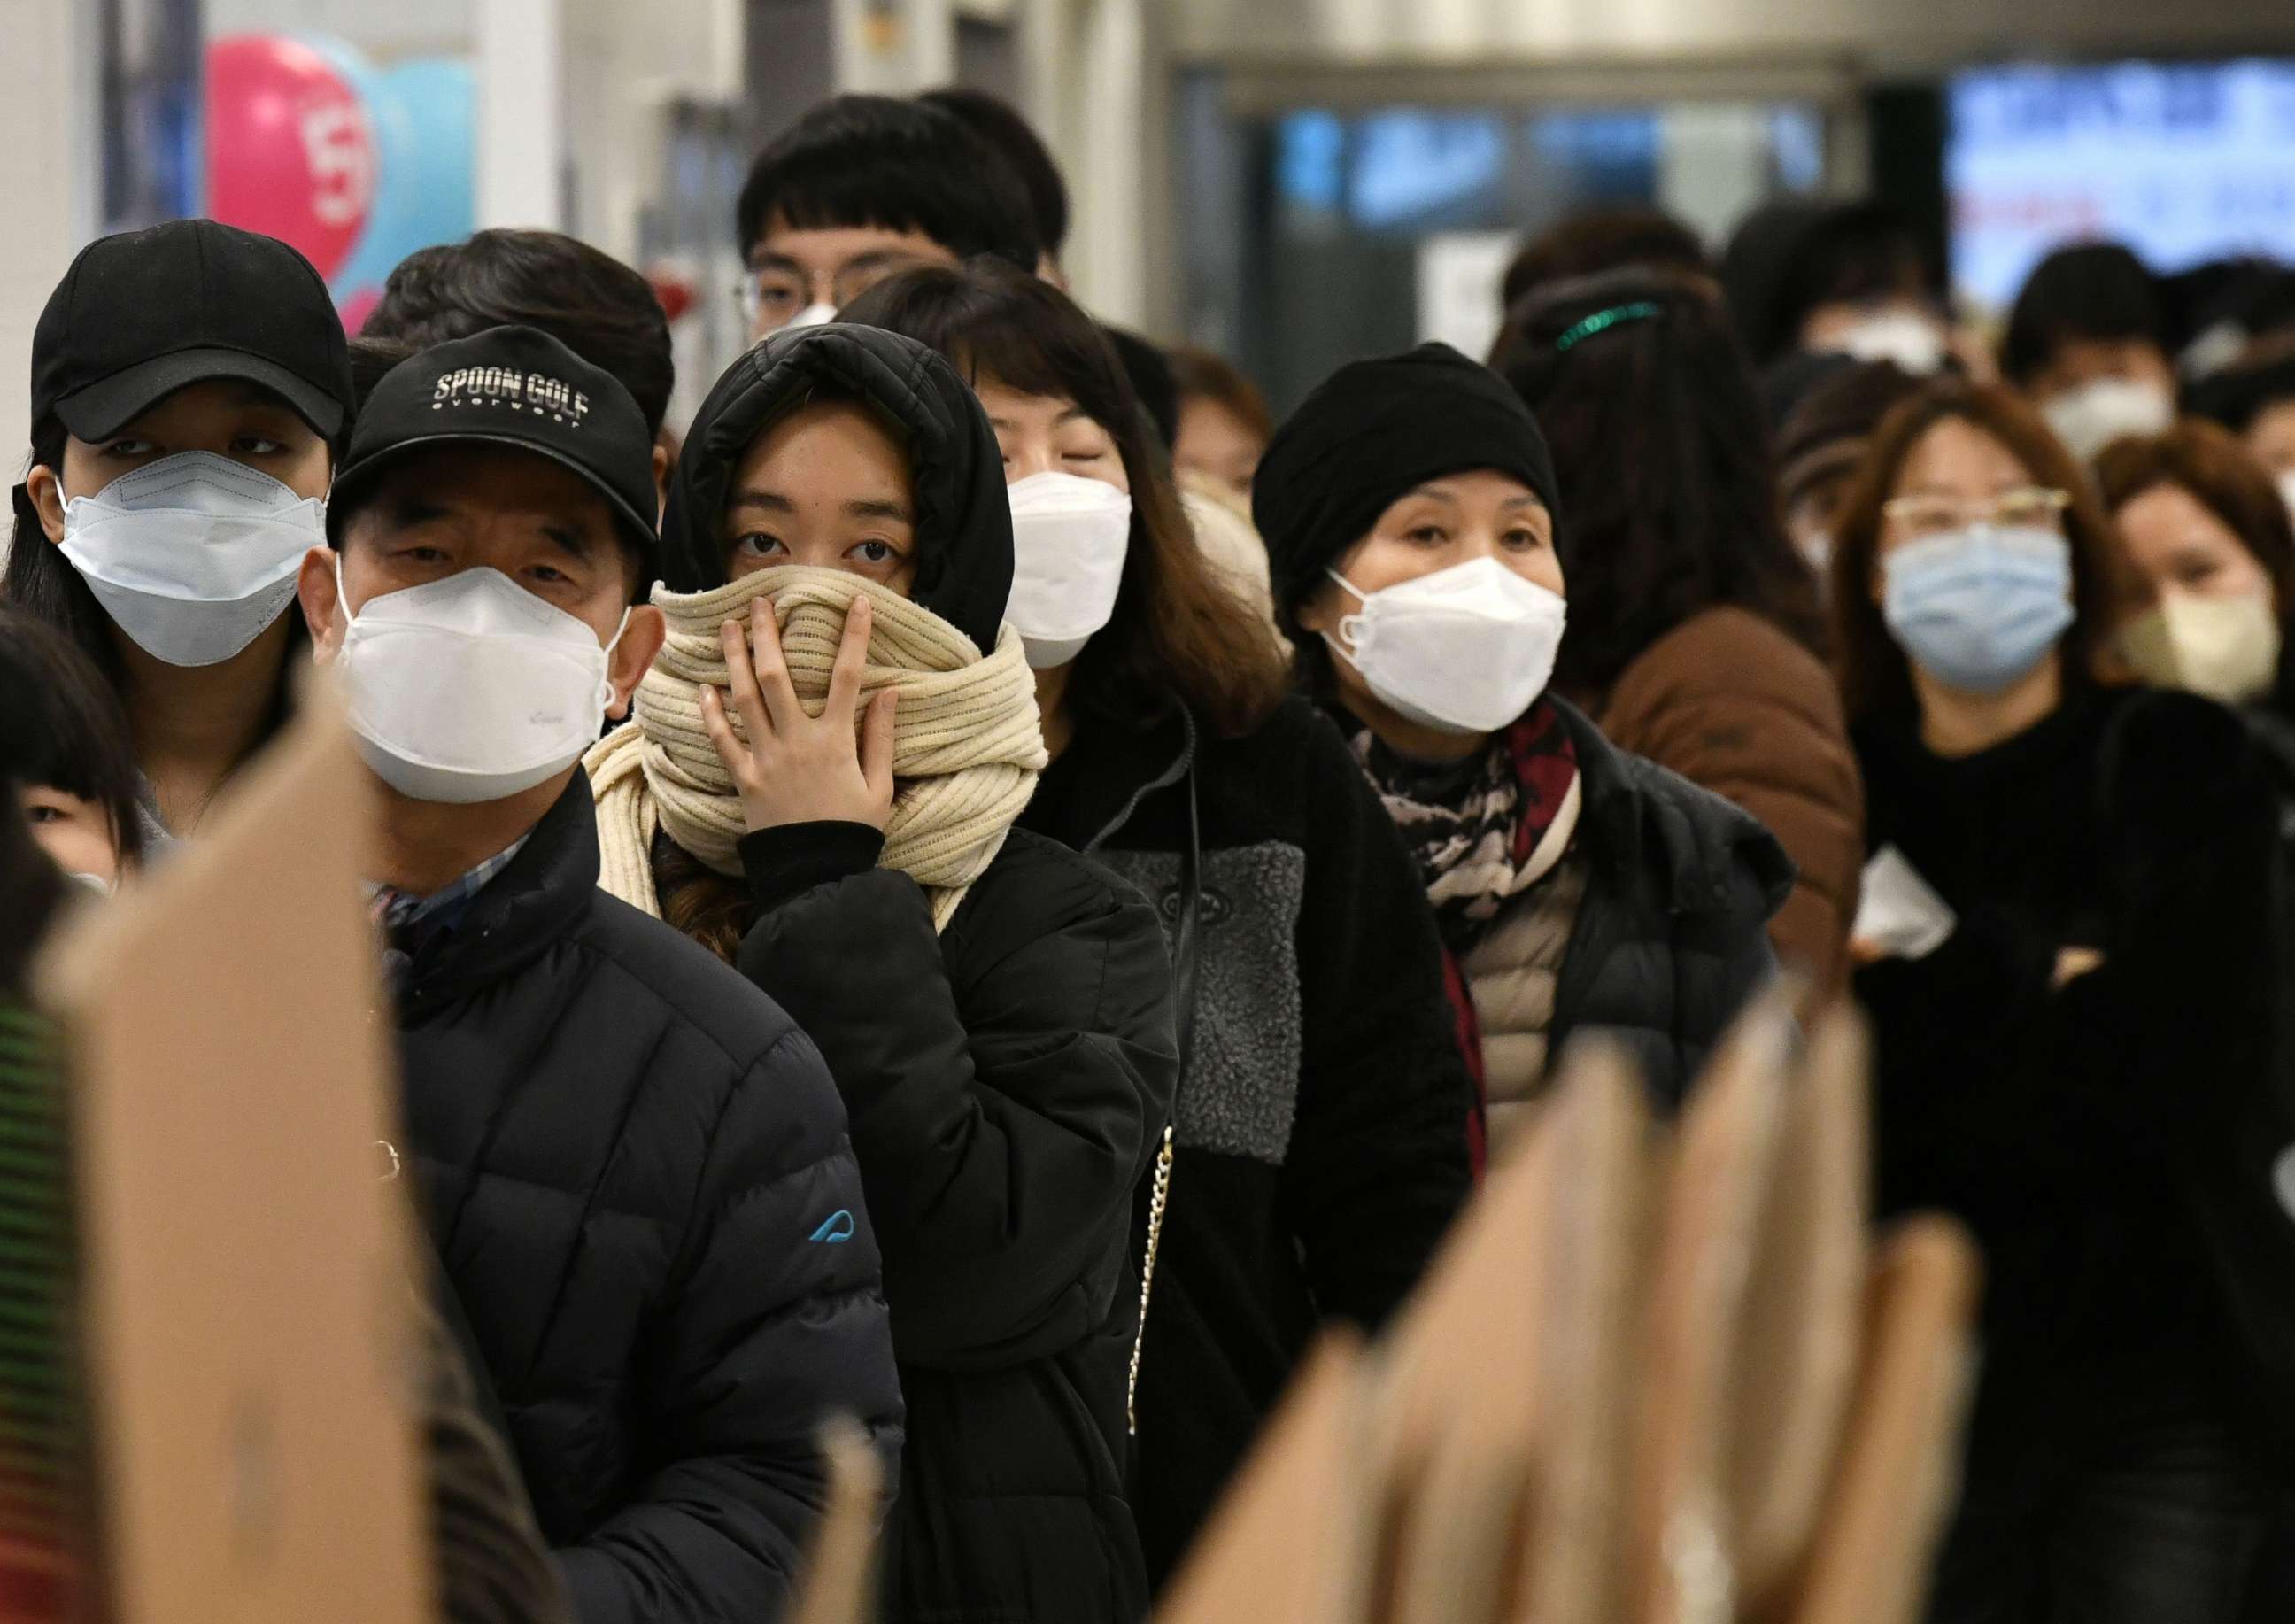 PHOTO: People wait in a line to buy face masks at a retail store in the southeastern city of Daegu on February 25, 2020. 